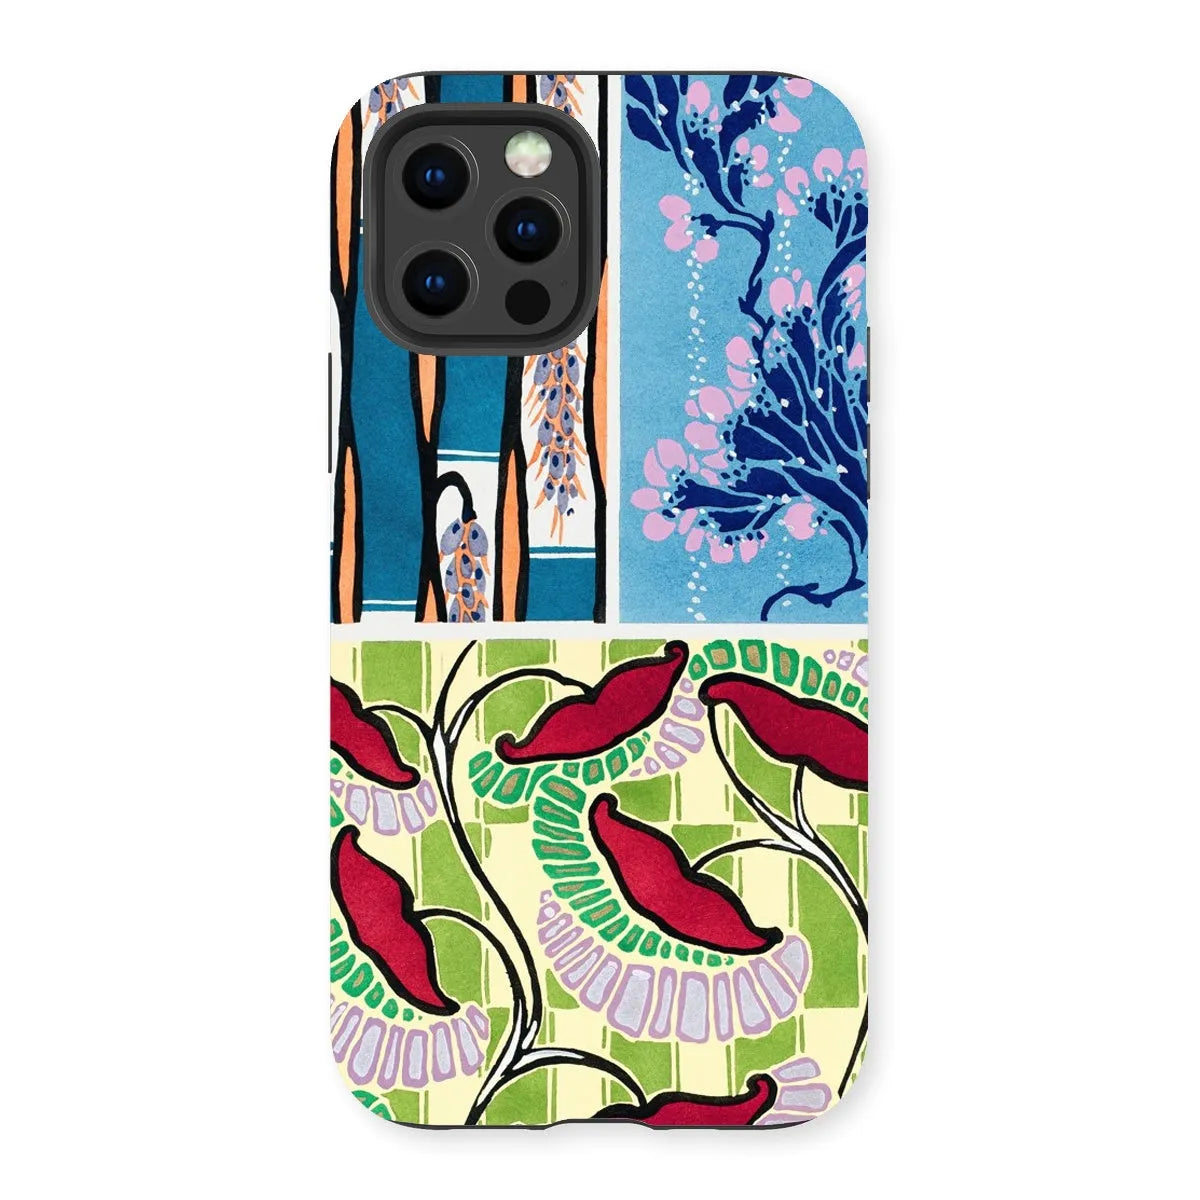 Floral Kitsch Aesthetic Art Phone Case - E.a. Séguy - Iphone 13 Pro / Matte - Mobile Phone Cases - Aesthetic Art